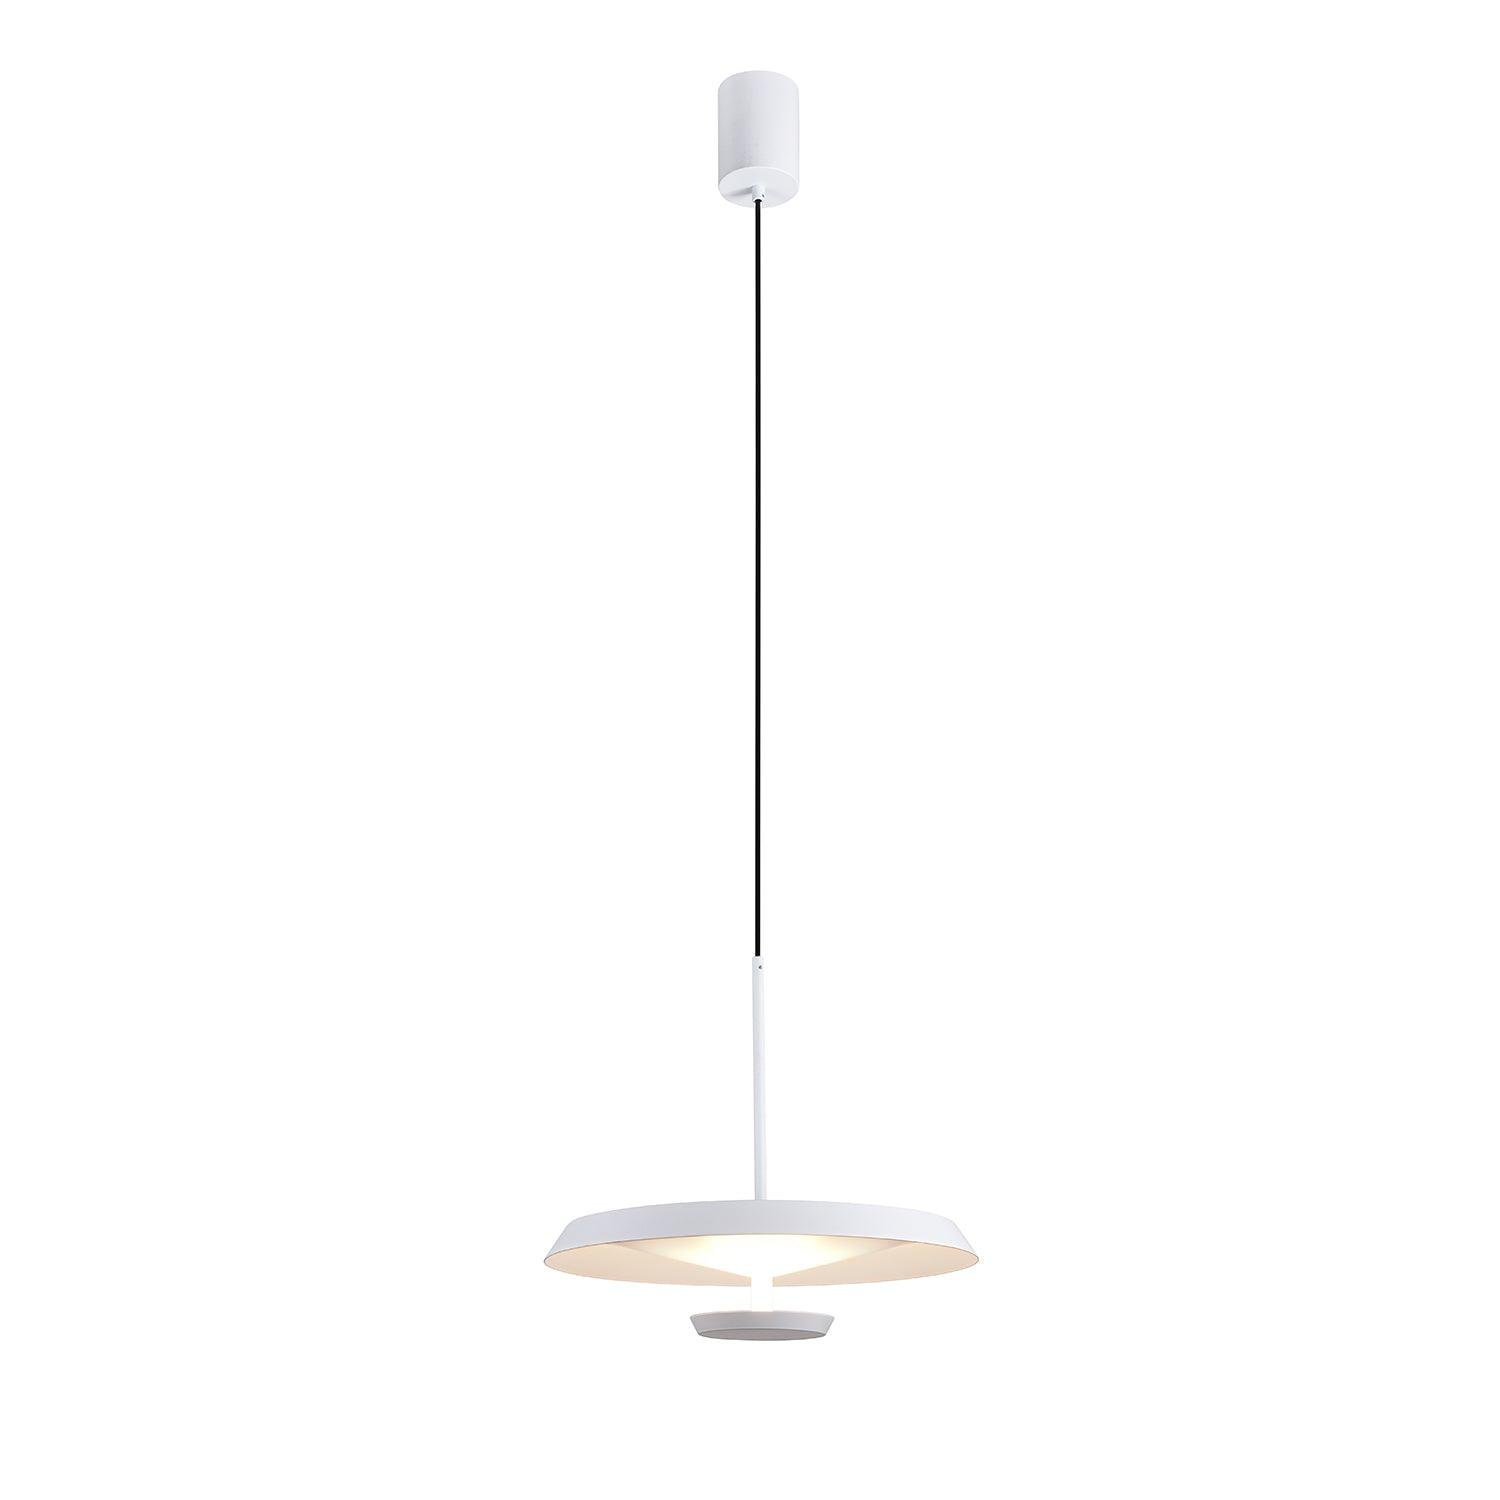 White Flat Pendant Light with a 9.8-inch diameter and 10.4-inch height (or 25cm x 26.5cm), emitting a refreshing cool glow.